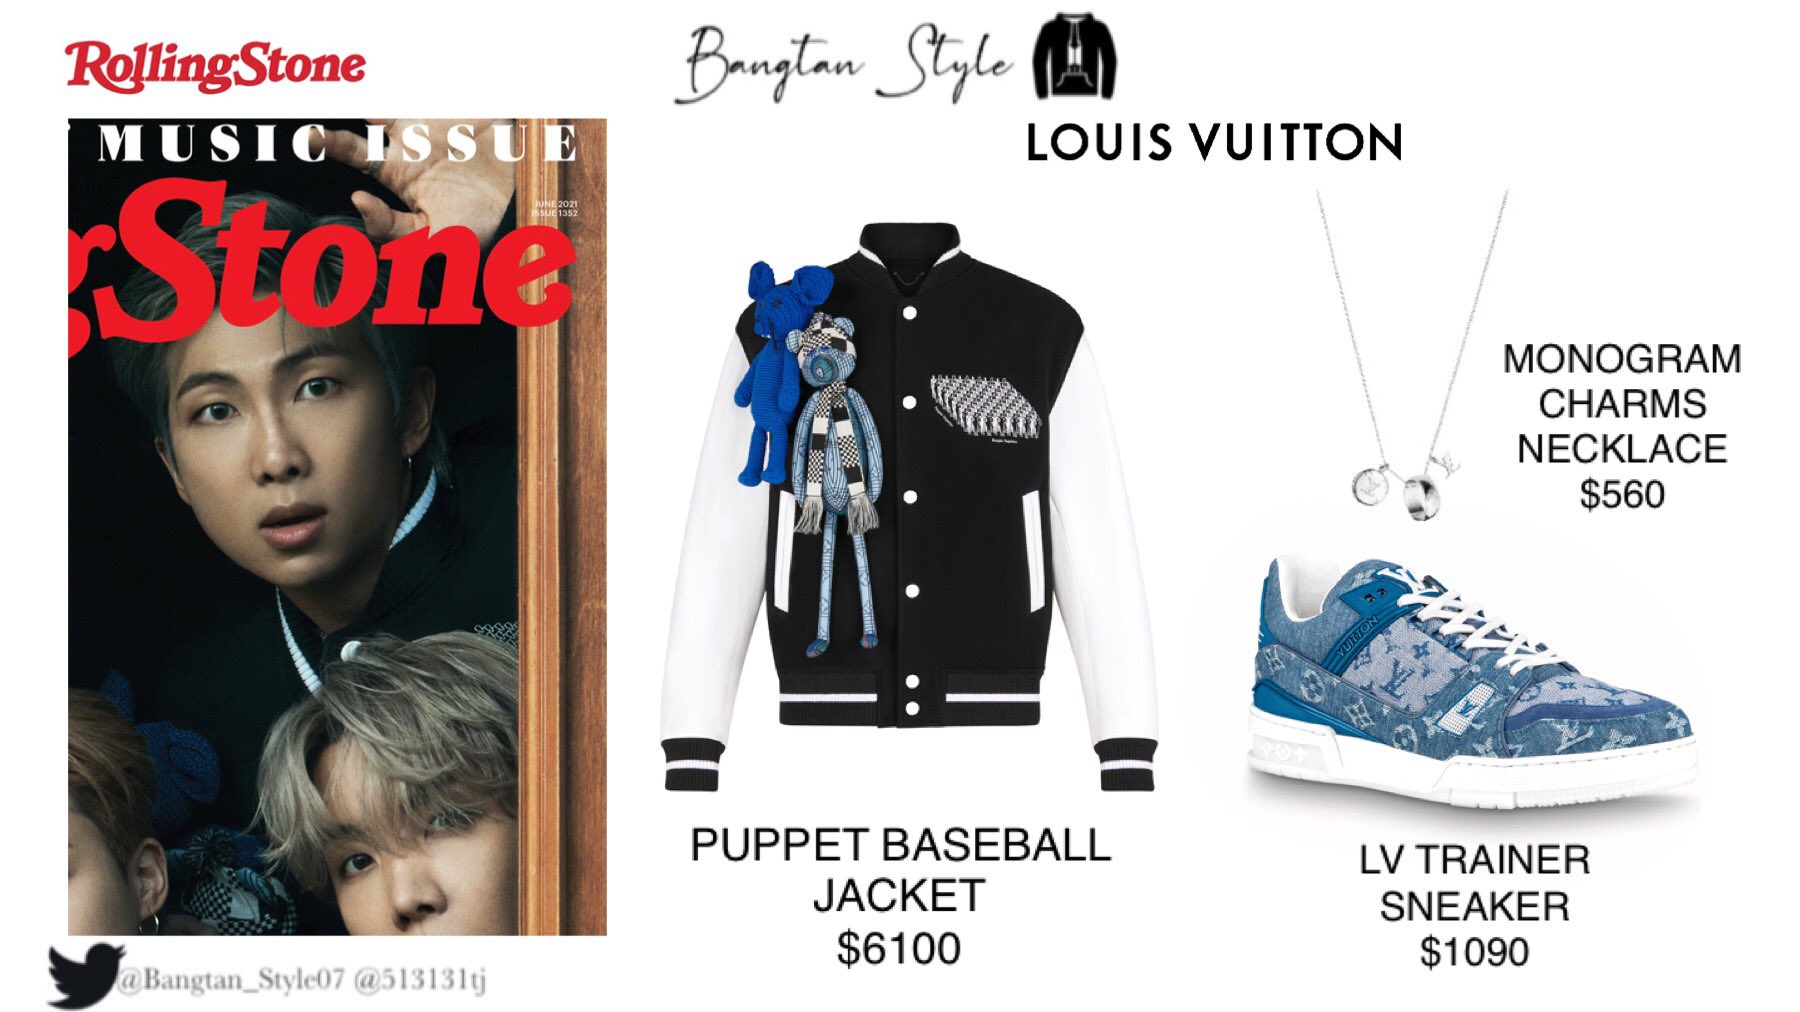 Bangtan Style⁷ (slow) on X: BTS x ROLLING STONE June Cover BTS members  were all wearing LOUIS VUITTON. #RM #SUGA #JHOPE #JUNGKOOK  #BTSxRollingStone @BTS_twt @RollingStone @LouisVuitton   / X